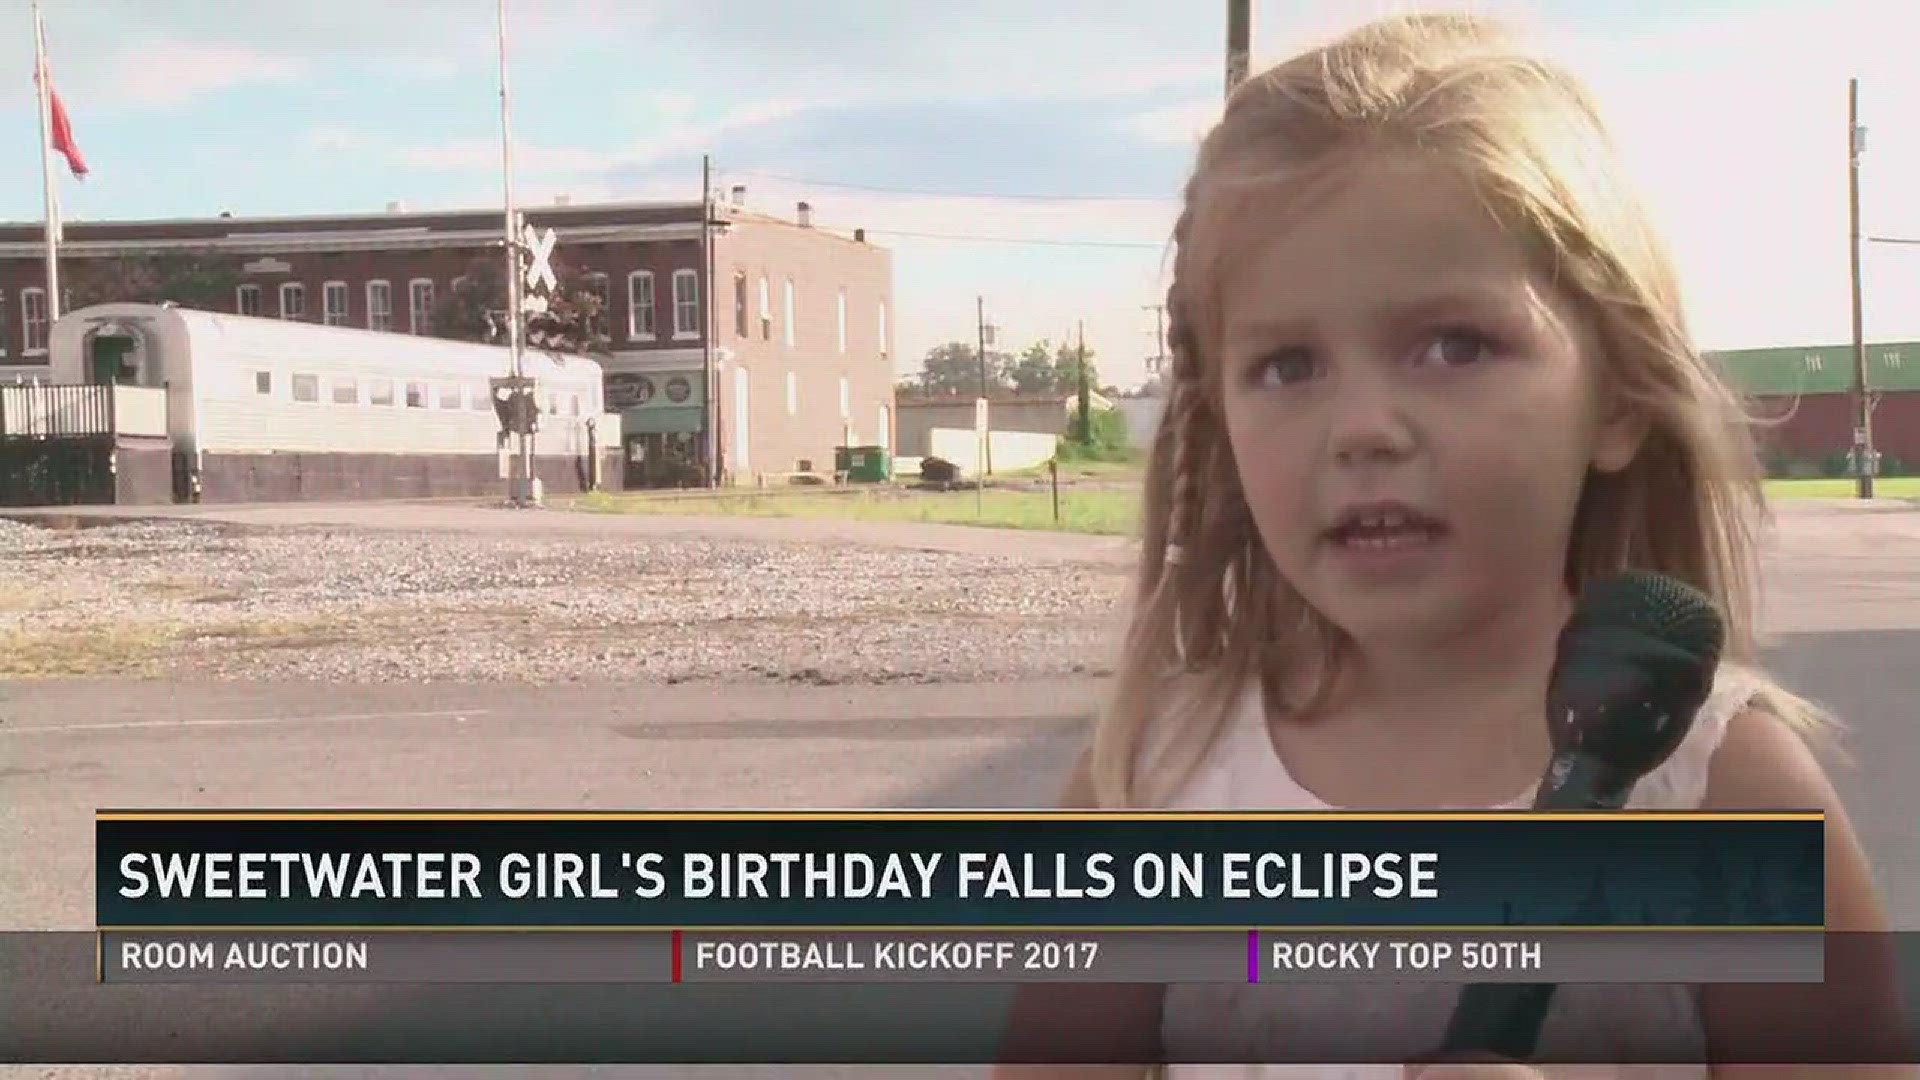 Aug. 15, 2017: While millions of people will be celebrating the total solar eclipse on Aug. 21, a young Sweetwater girl will be celebrating her birthday.